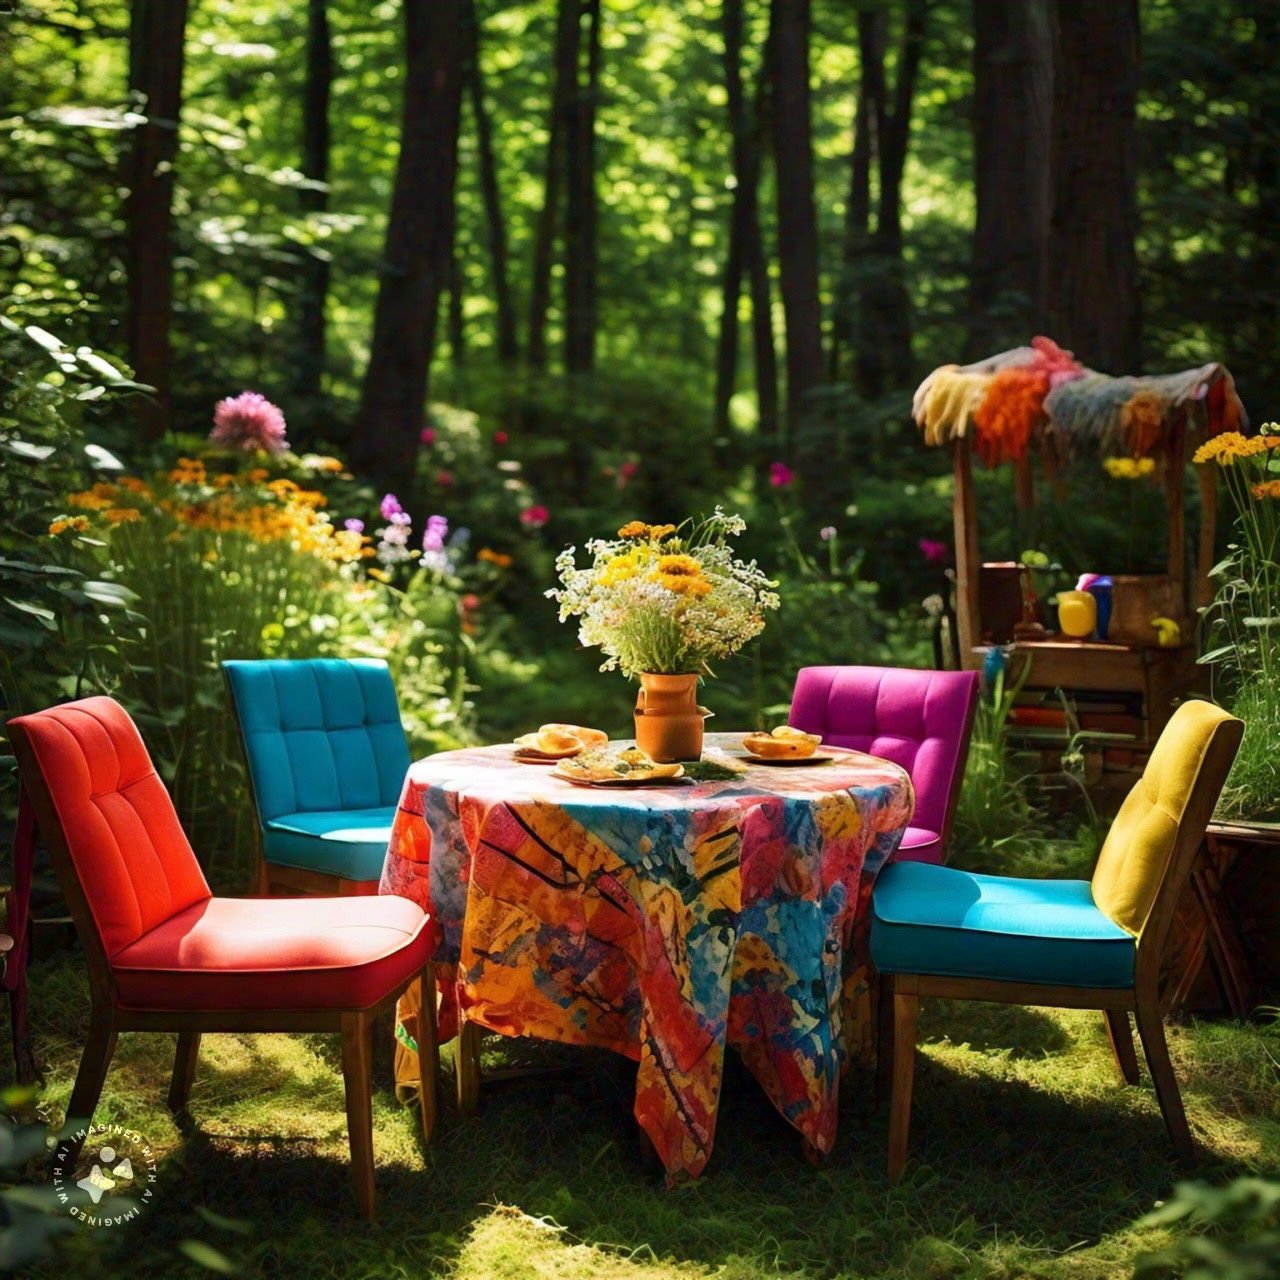 Sitting in a forest surrounded by bright colors would be a magical! How will you bring magic into your day and weekend?